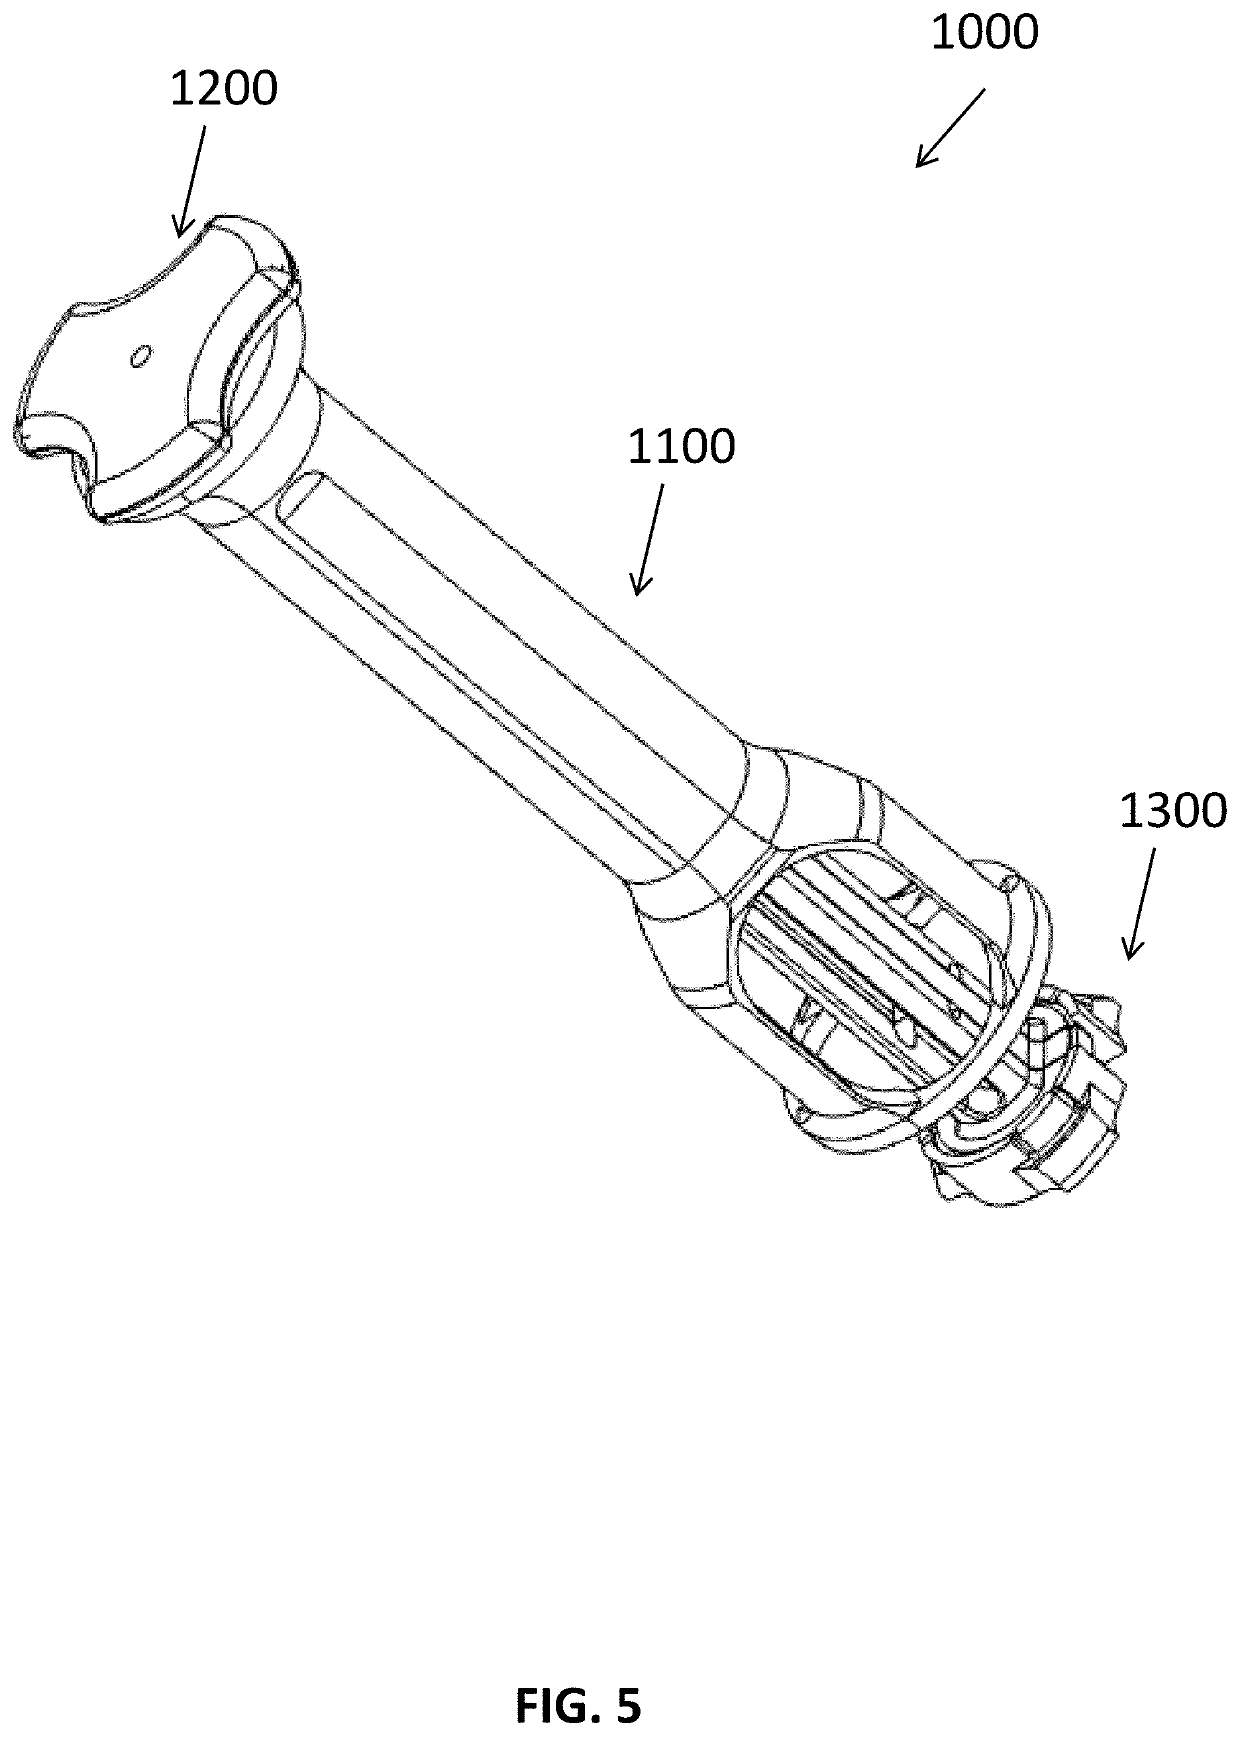 Shoulder Implant Impactor With Stabilization Features